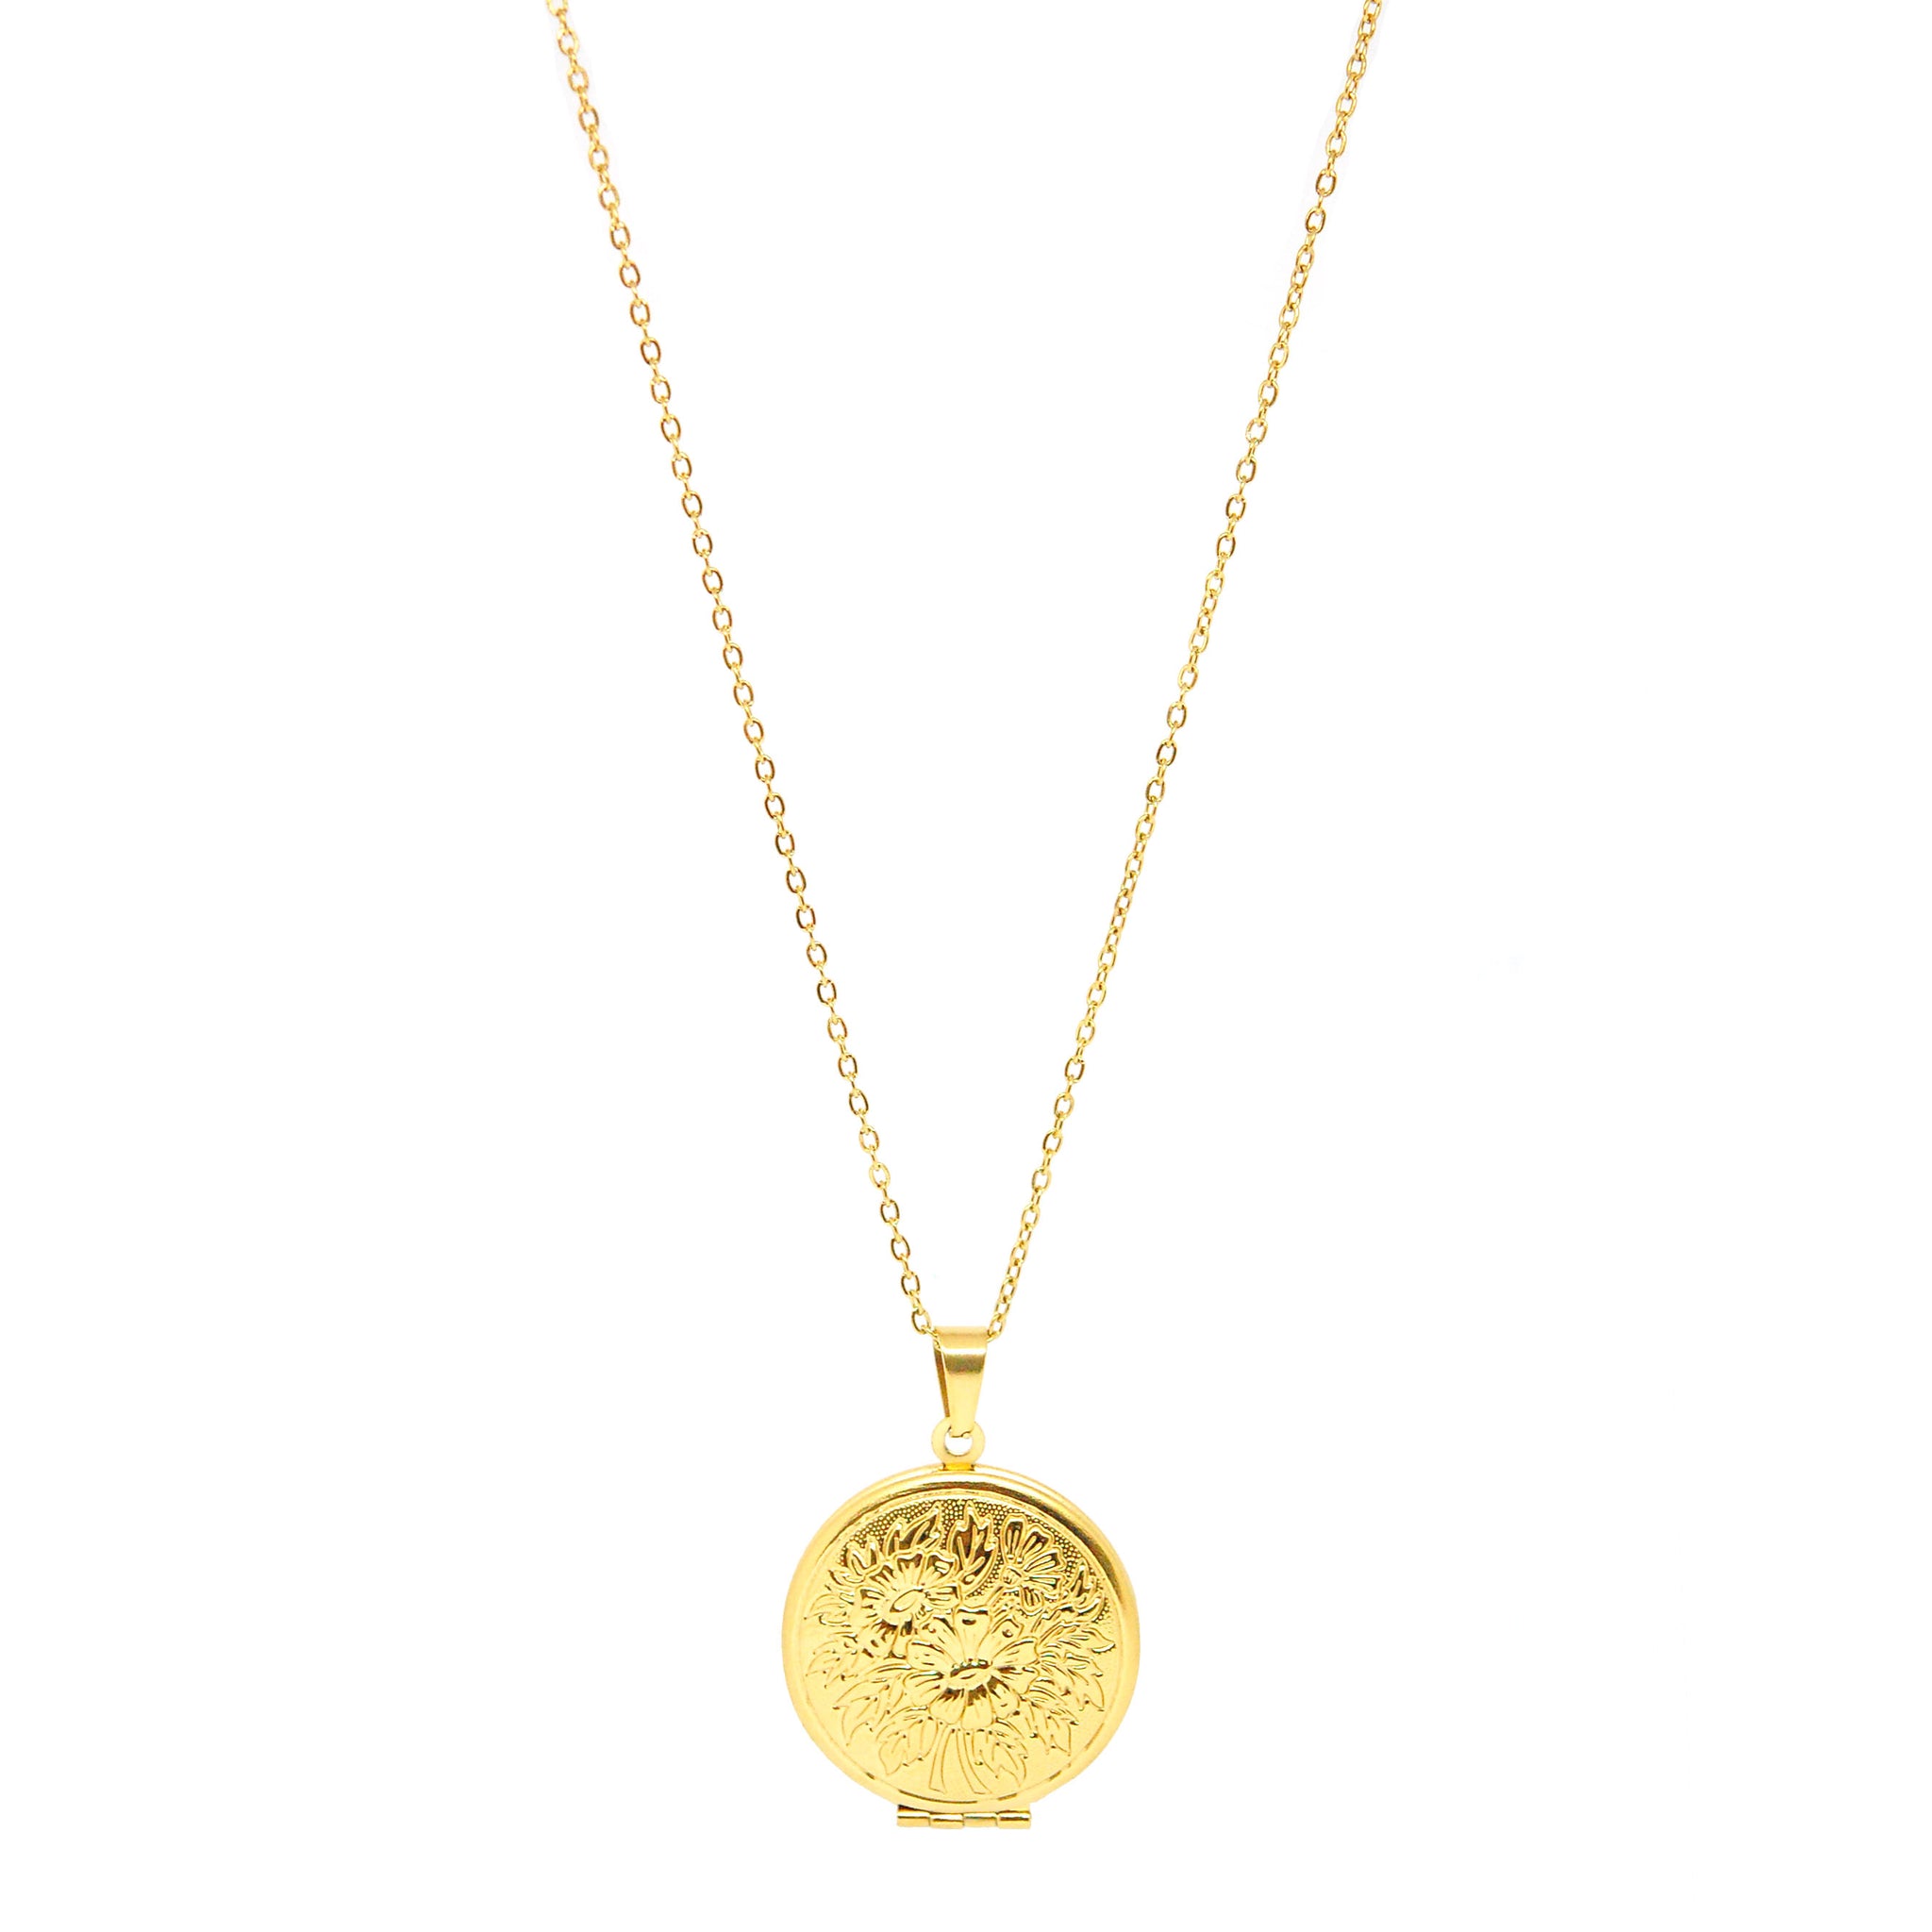 ESN 7634: All IPG 27mm Open-Able European Circle Locket Necklace